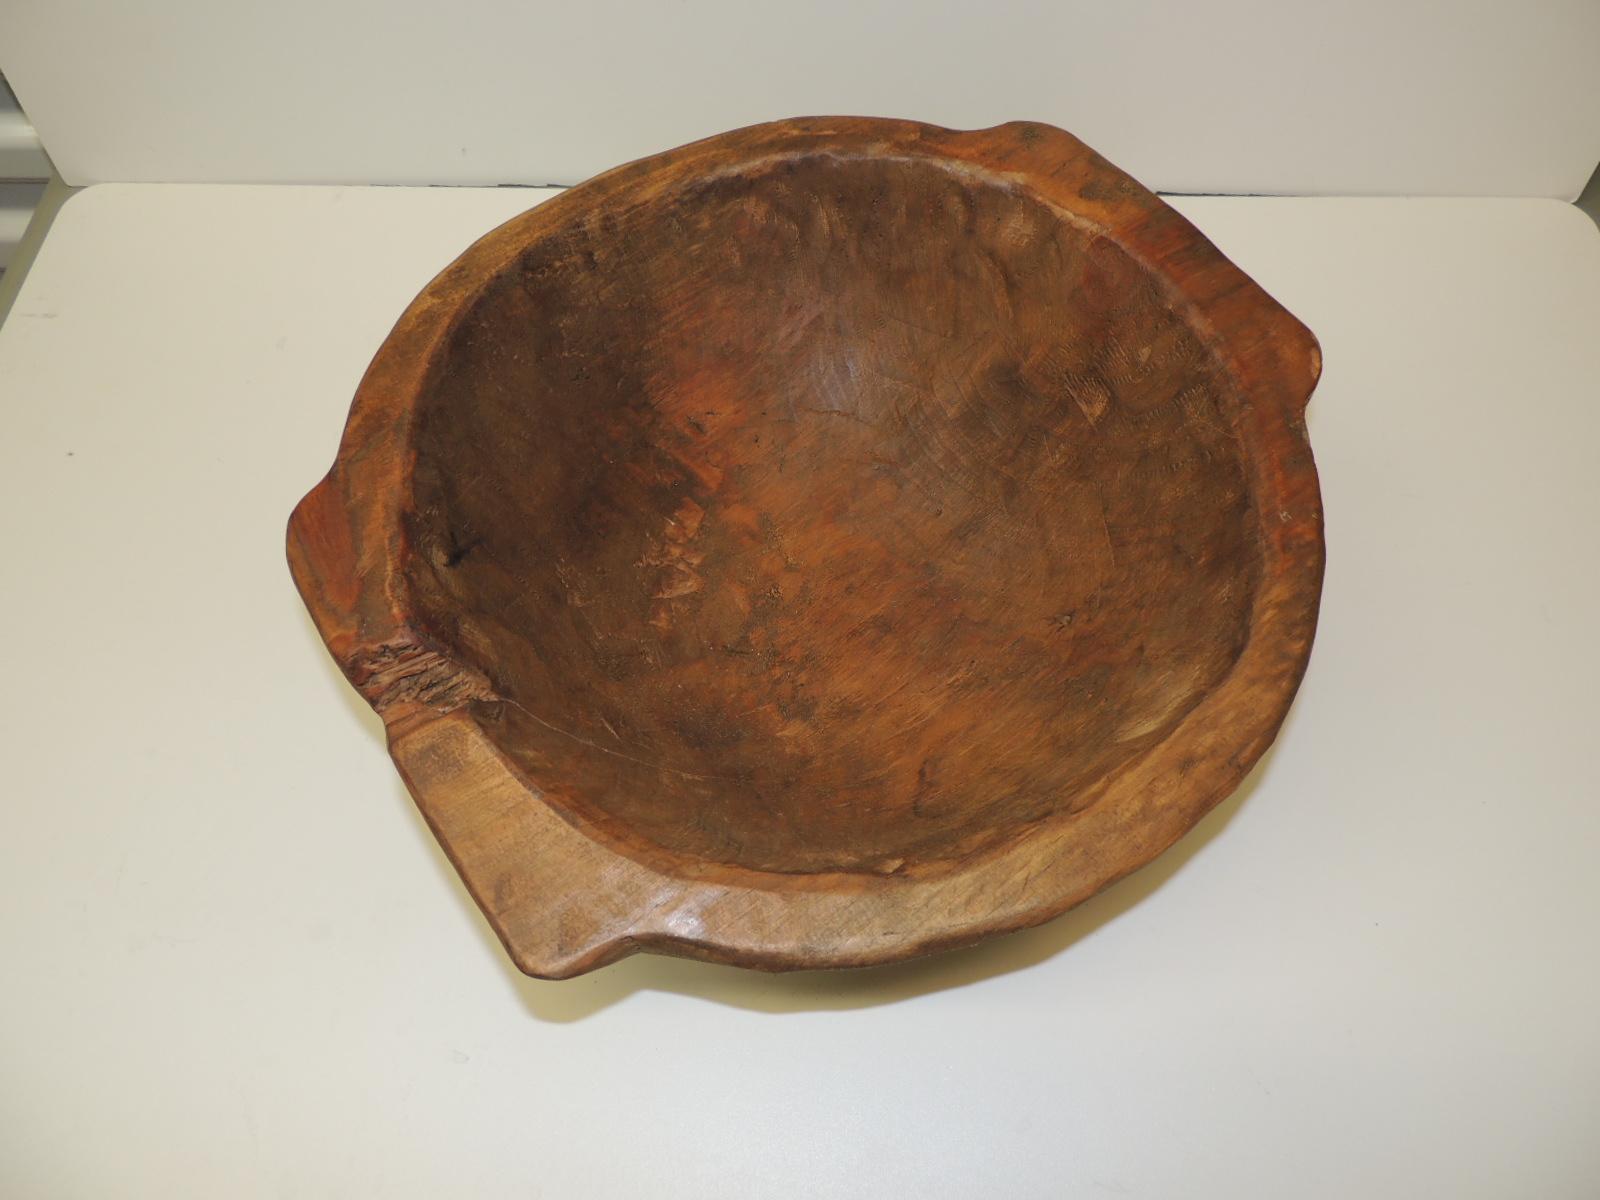 Tree root round hand carved rustic bowl.
Size: 14